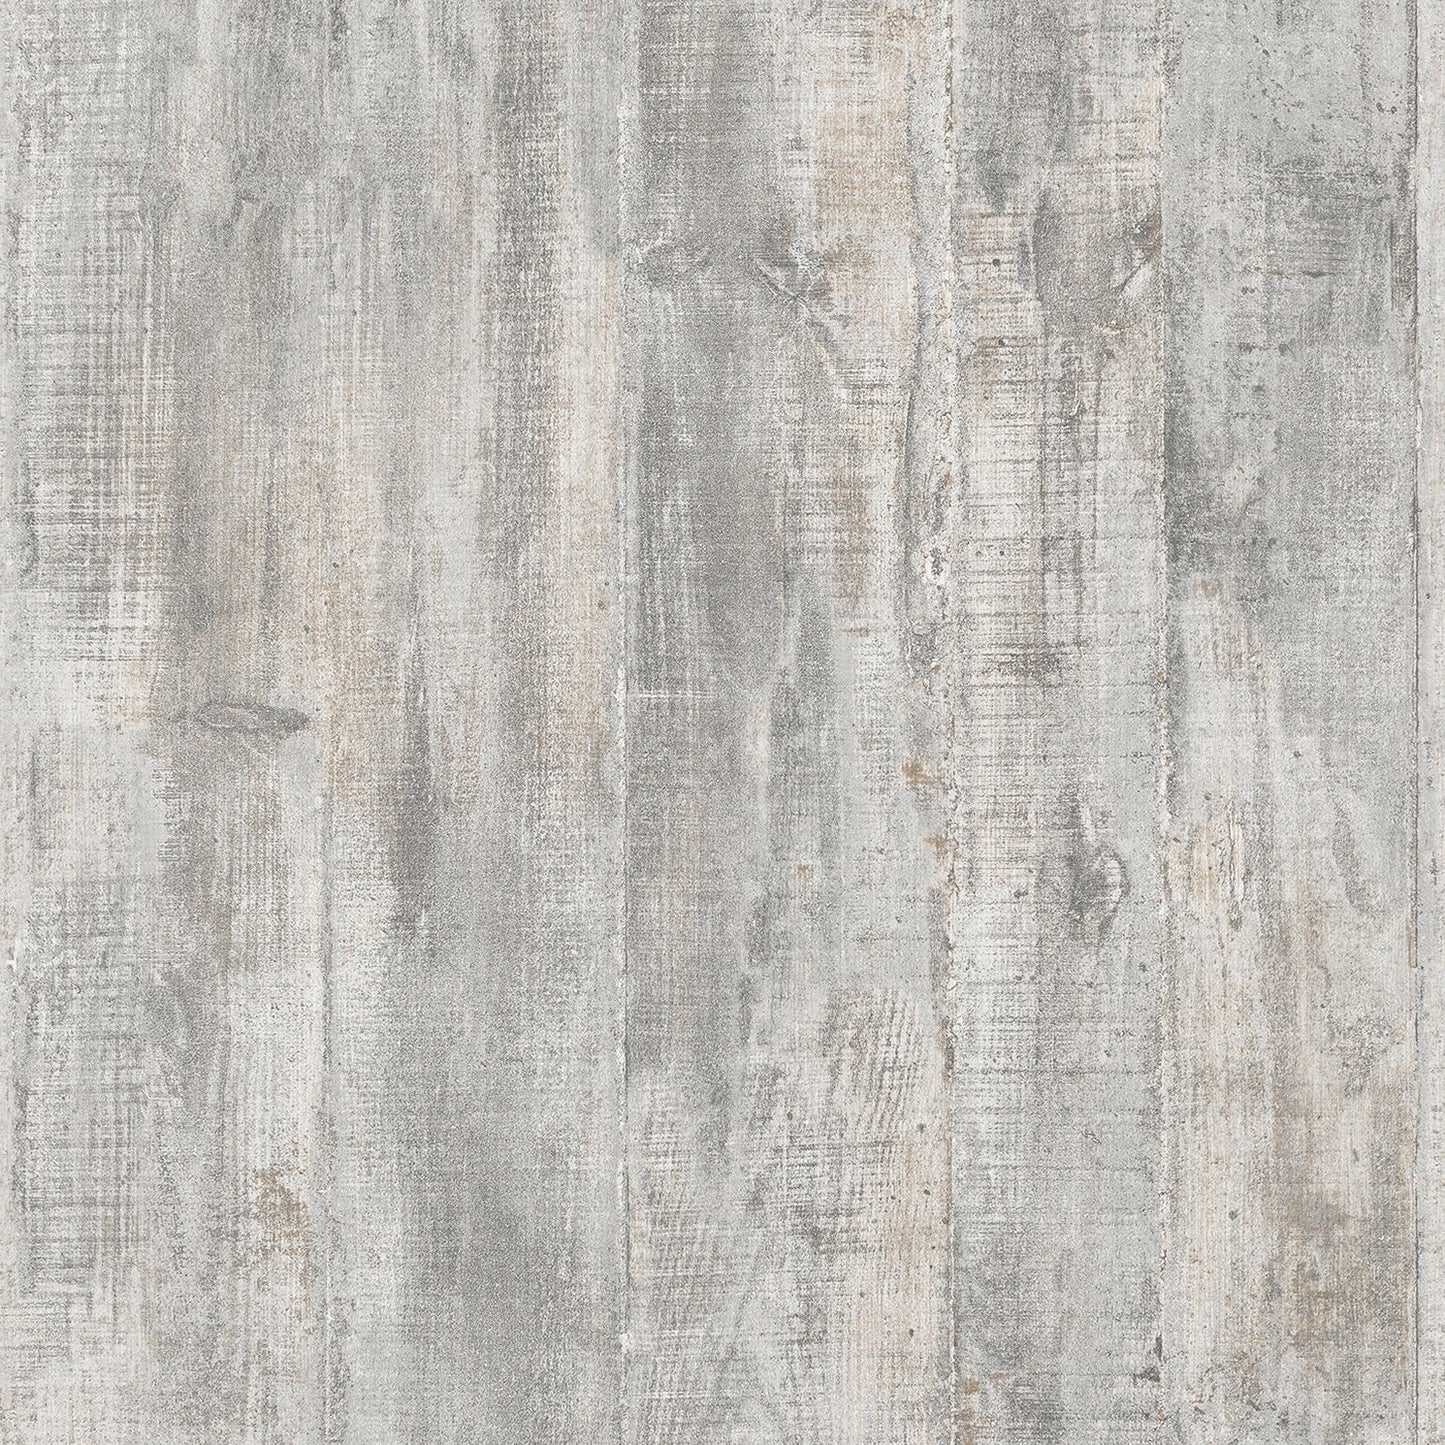 Shop 4020-68319 Geo & Textures Huck Grey Weathered Wood Plank Grey by Advantage